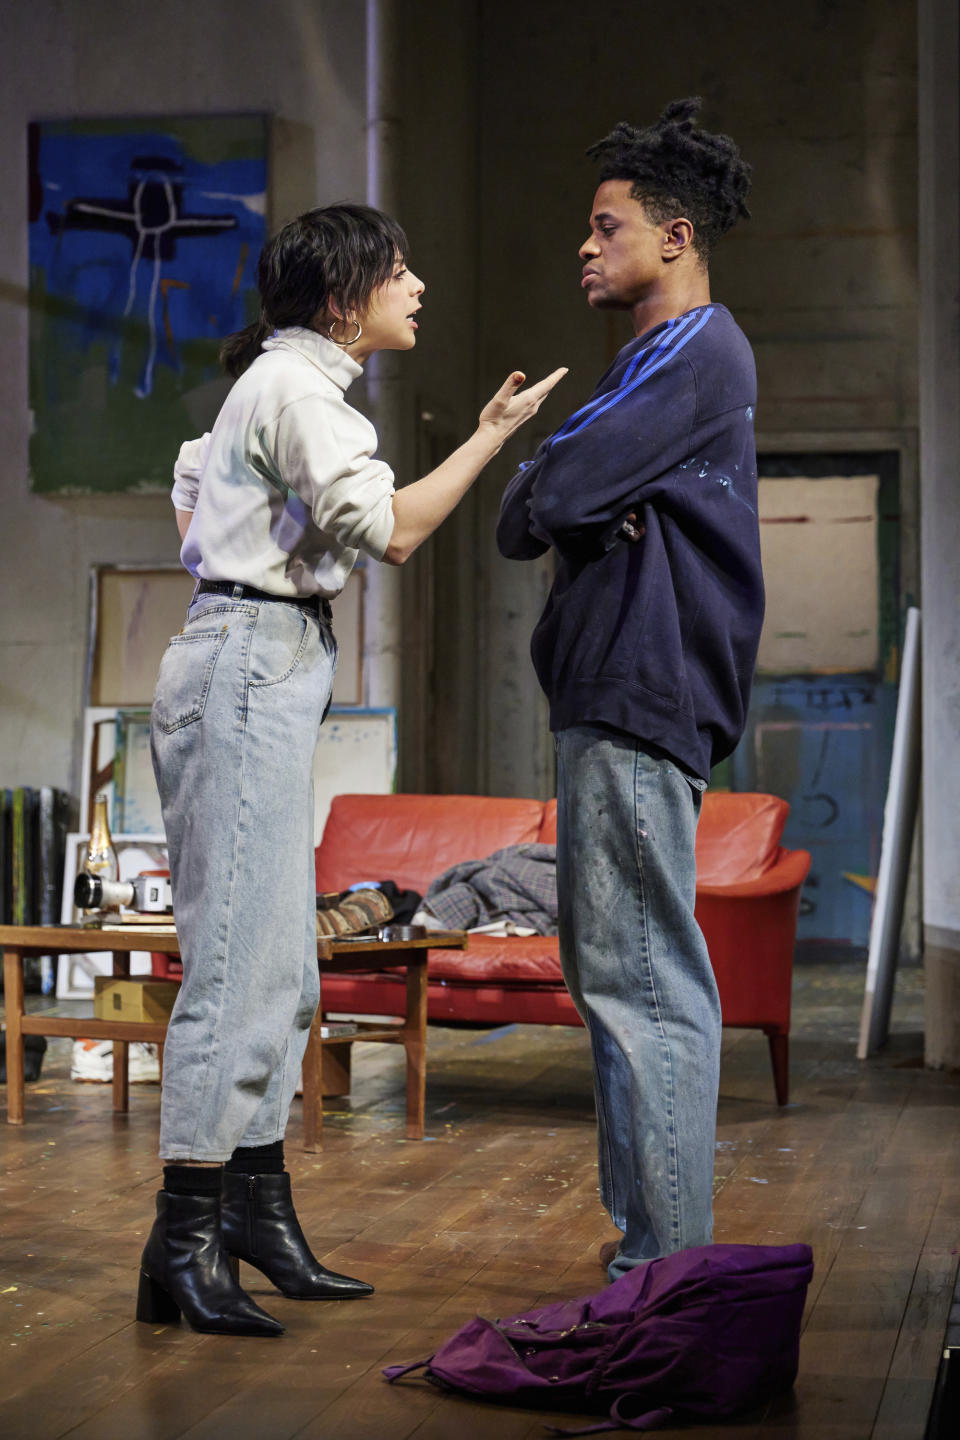 This image provided by Jeremy Daniel shows Krysta Rodriguez as Maya, left, and Jeremy Pope as Jean-Michel Basquiat, in a scene from "The Collaboration," Anthony McCarten's fictional account about the real period in 1984 when Andy Warhol was compelled to work with Basquiat, a new sensation and potential rival of the New York art world. (Jeremy Daniel via AP)